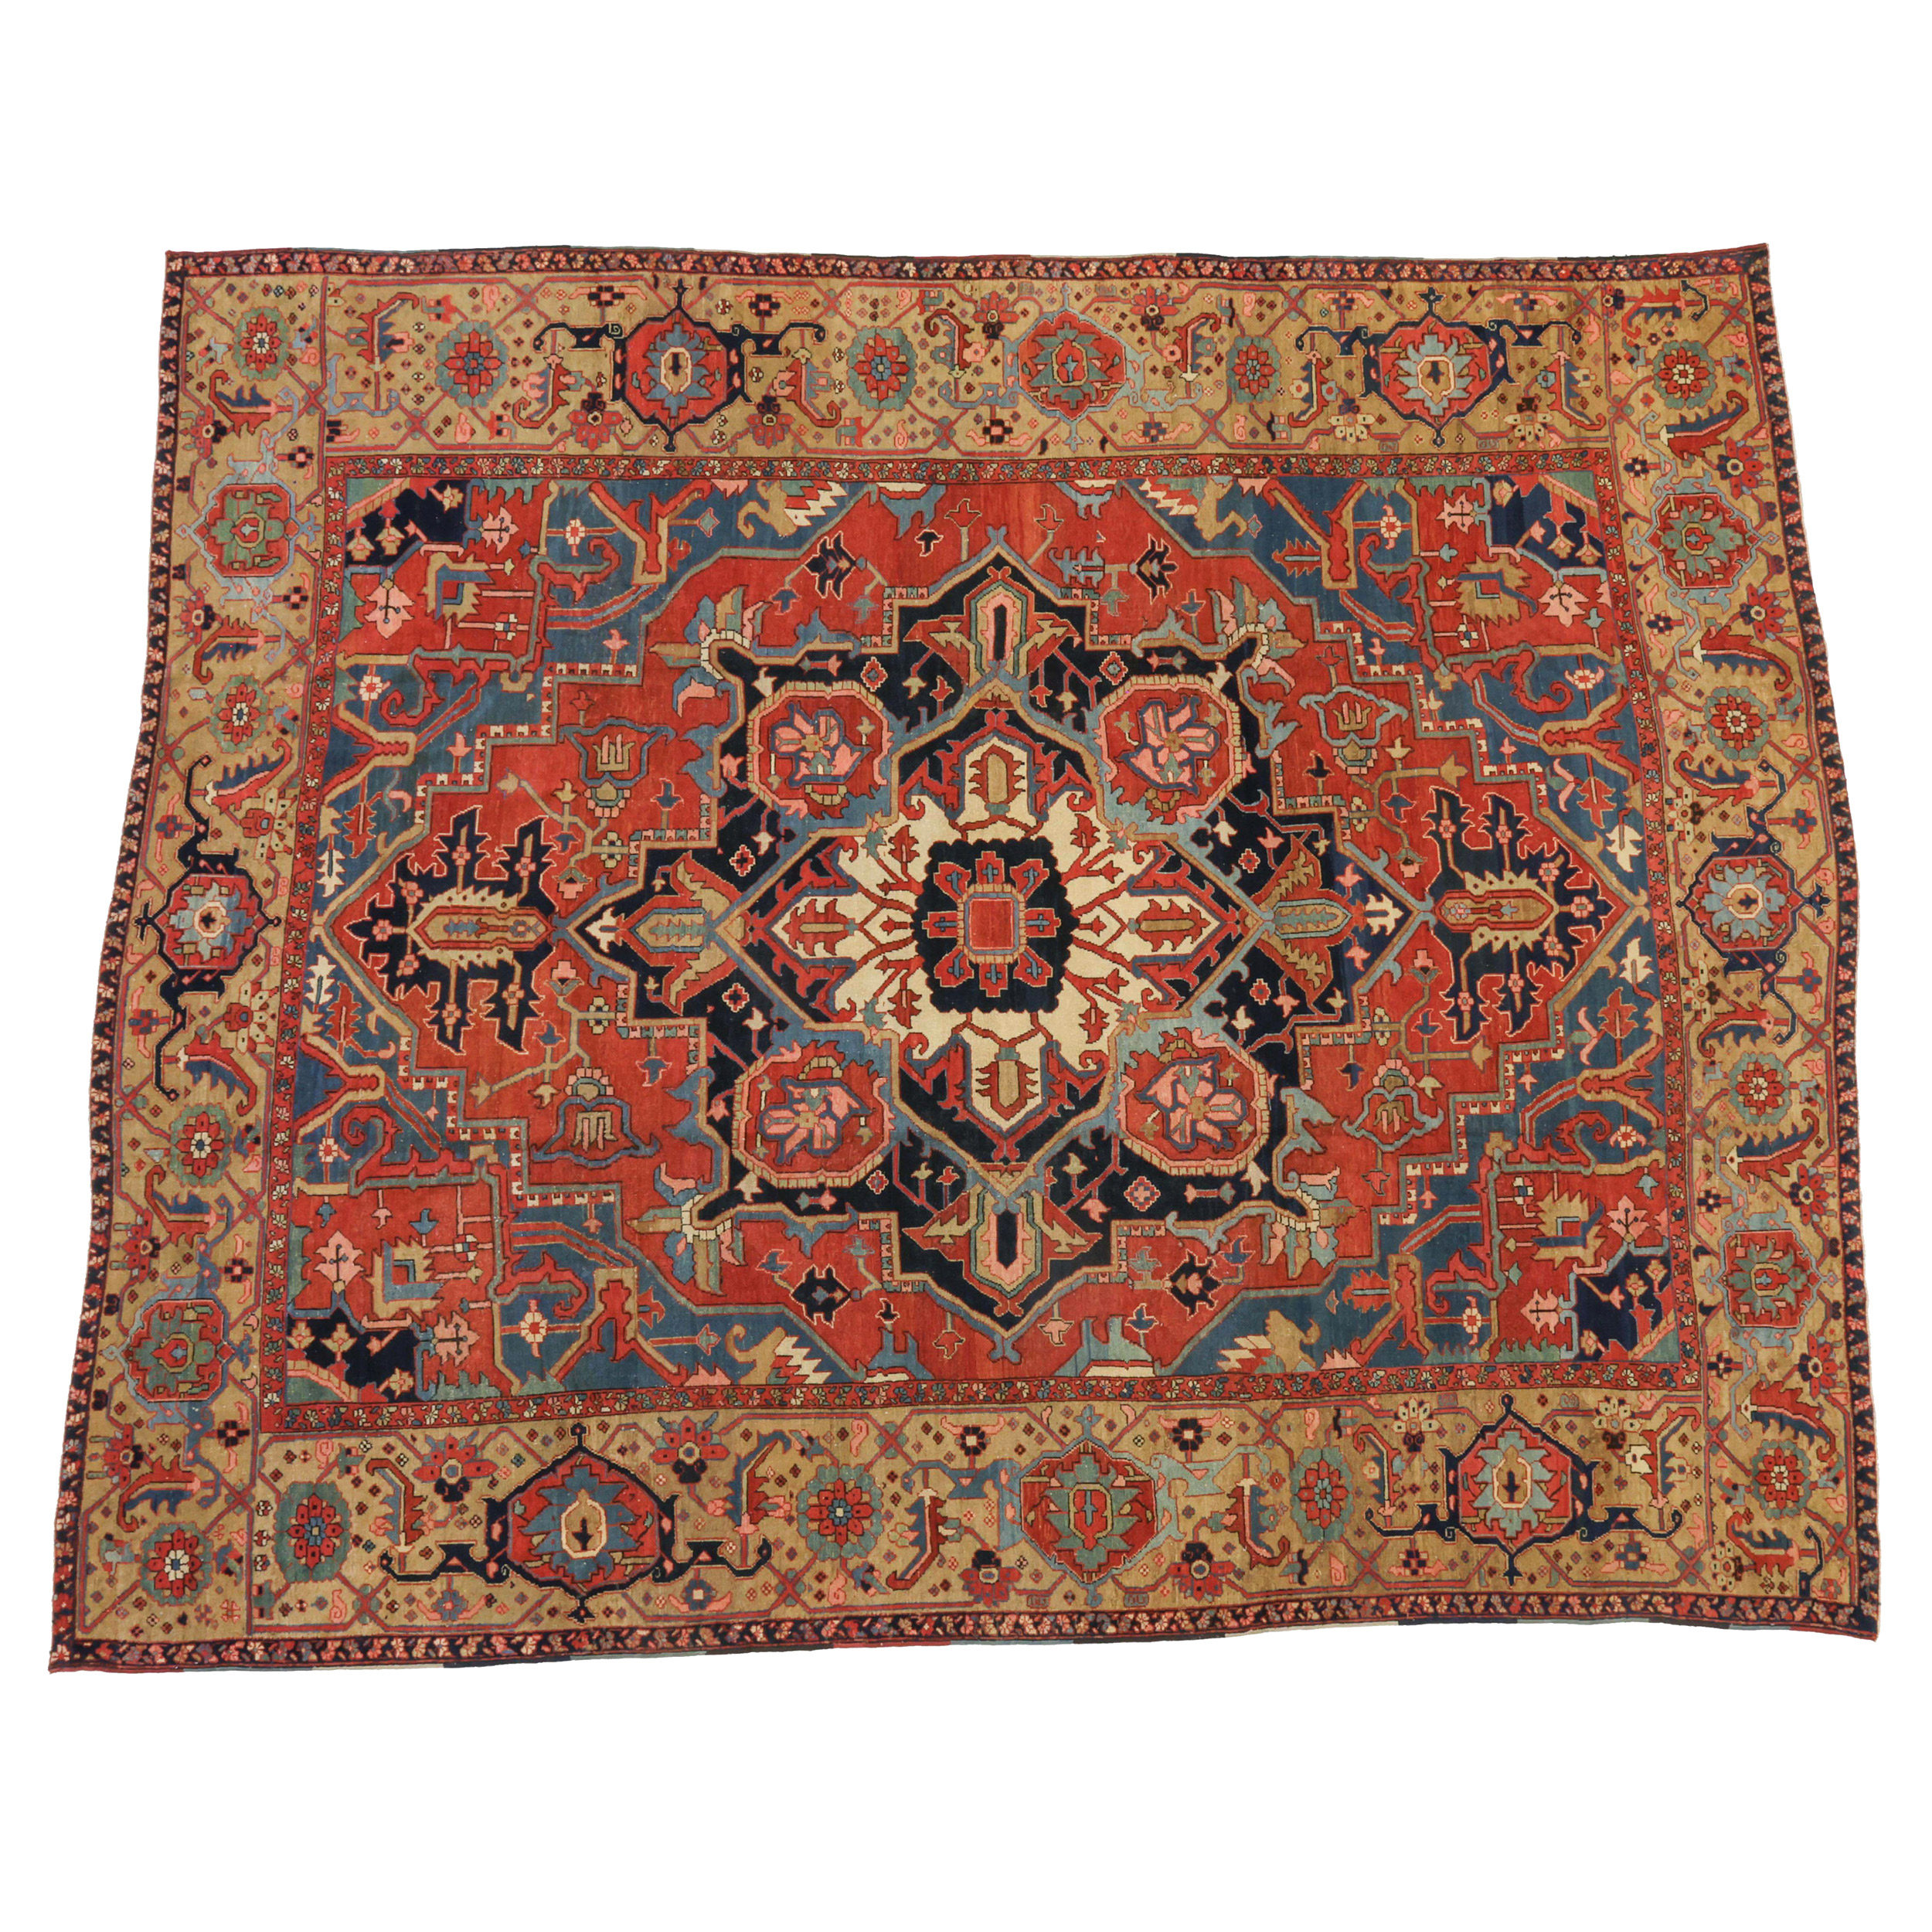 A late 19th century antique Persian Karaja carpet of the type often colloquially referred to as antique "Serapi" carpets. The salmon color field is decorated with a navy blue and ivory medallion and framed by mid blue corner spandrels and a "Turtle" design border of grand scale, northwest Persia, circa 1890. Boston,MA area based Douglas Stock Gallery is one of America's most selective dealers in antique Oriental rugs and specializes in antique carpets from the Heriz area in northwest Persia, especially the earlier Heriz, Karaja and Bakshaish carpets.